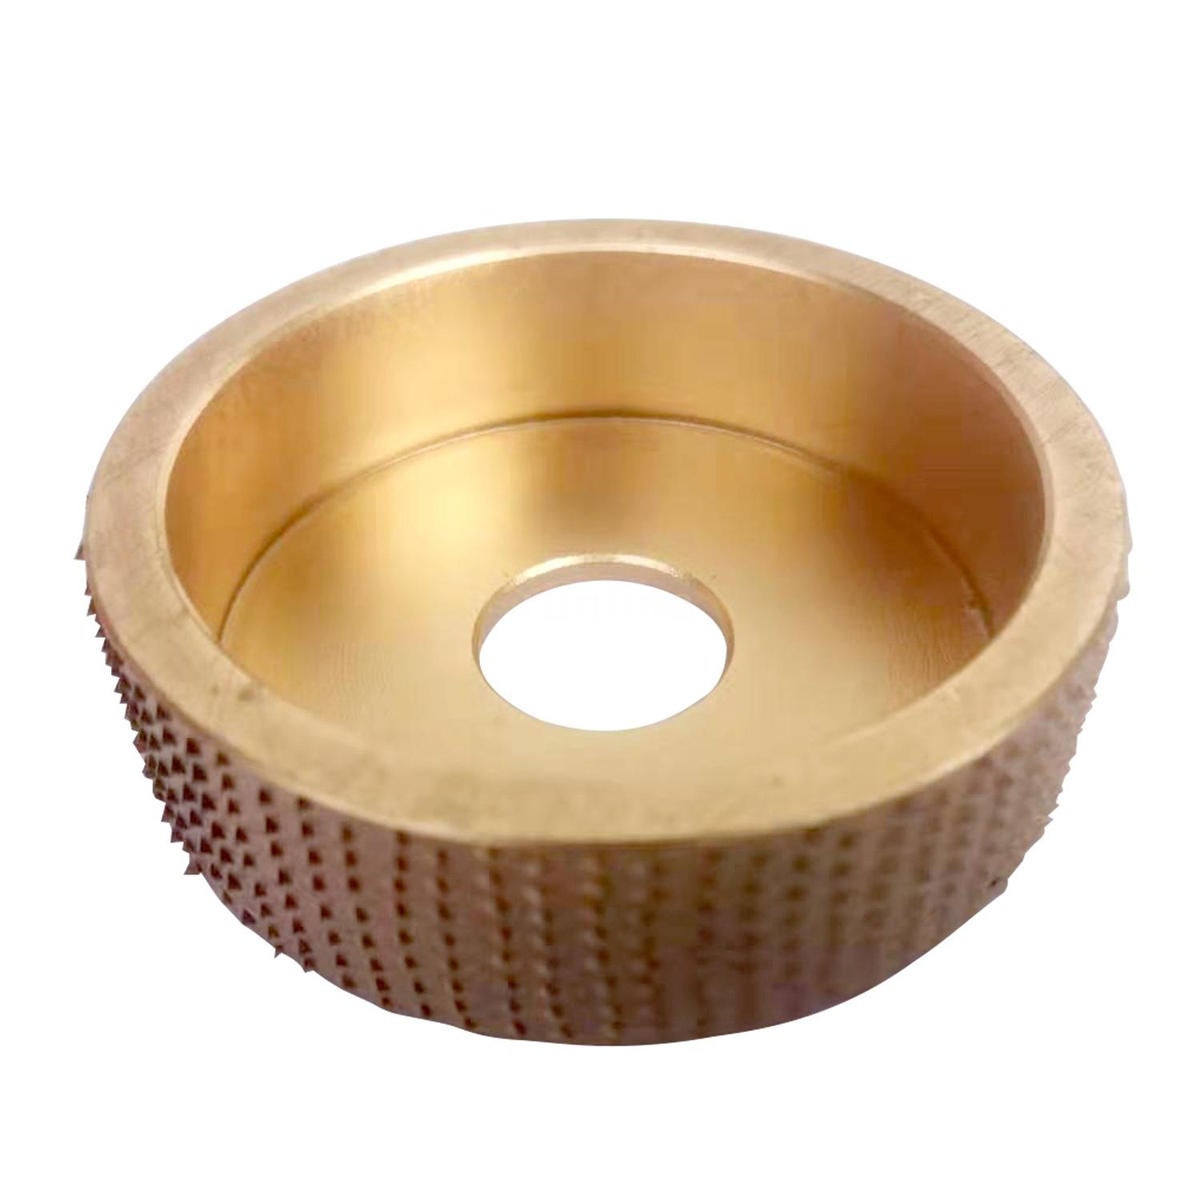 75mm Carving Disc 16mm Bore Steel Grinding Wheel Sanding Abrasive Rotary Tool for Angle Grinder GOLD COLOR